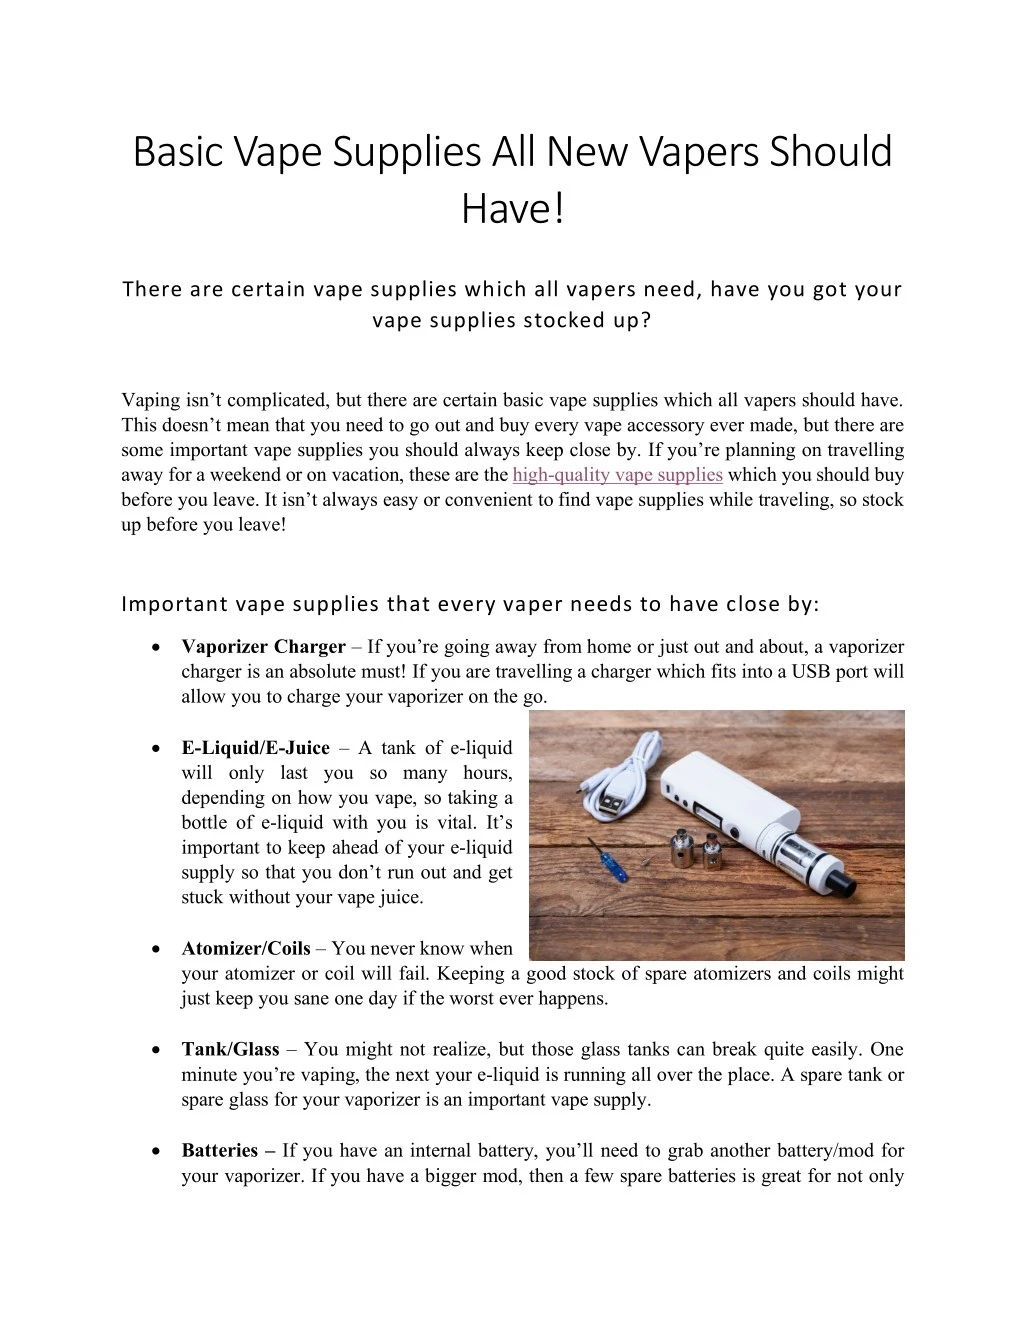 basic vape supplies all new vapers should have